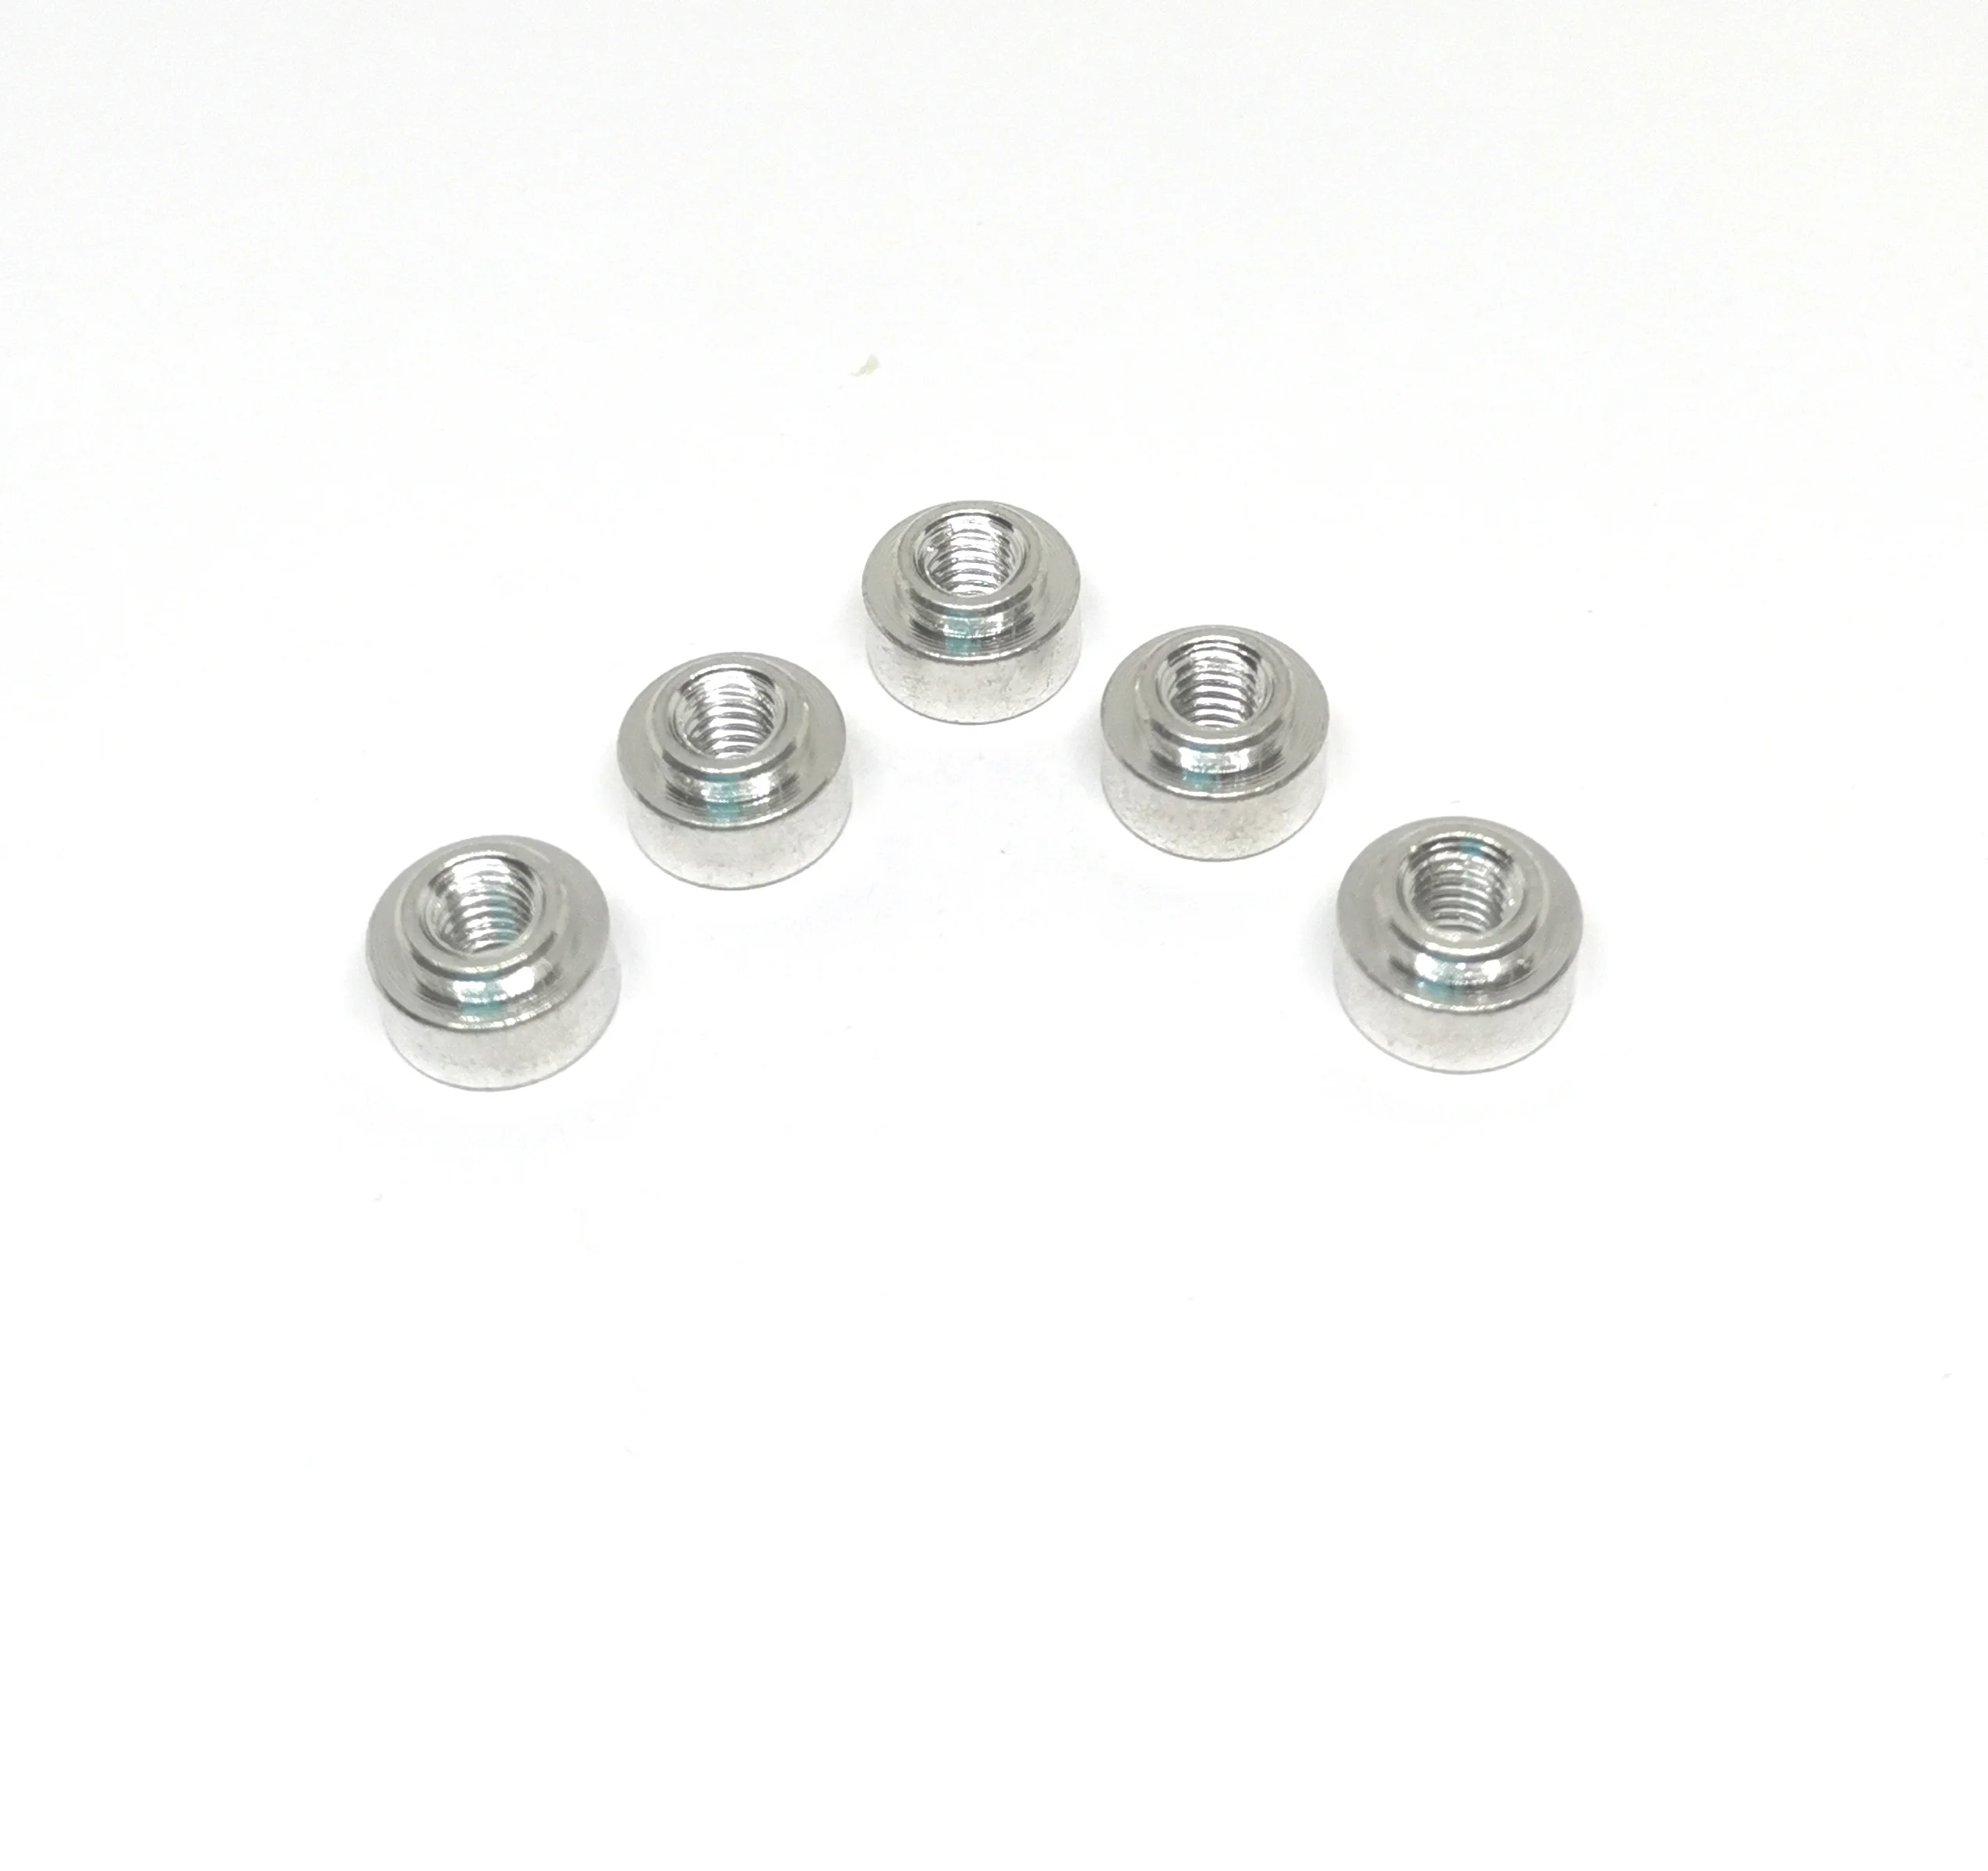 SMTSO standoff Brass Copper Steel Tin Plated SMD Spacer in SMD tape with SMD Cover PCB Surface mount nut